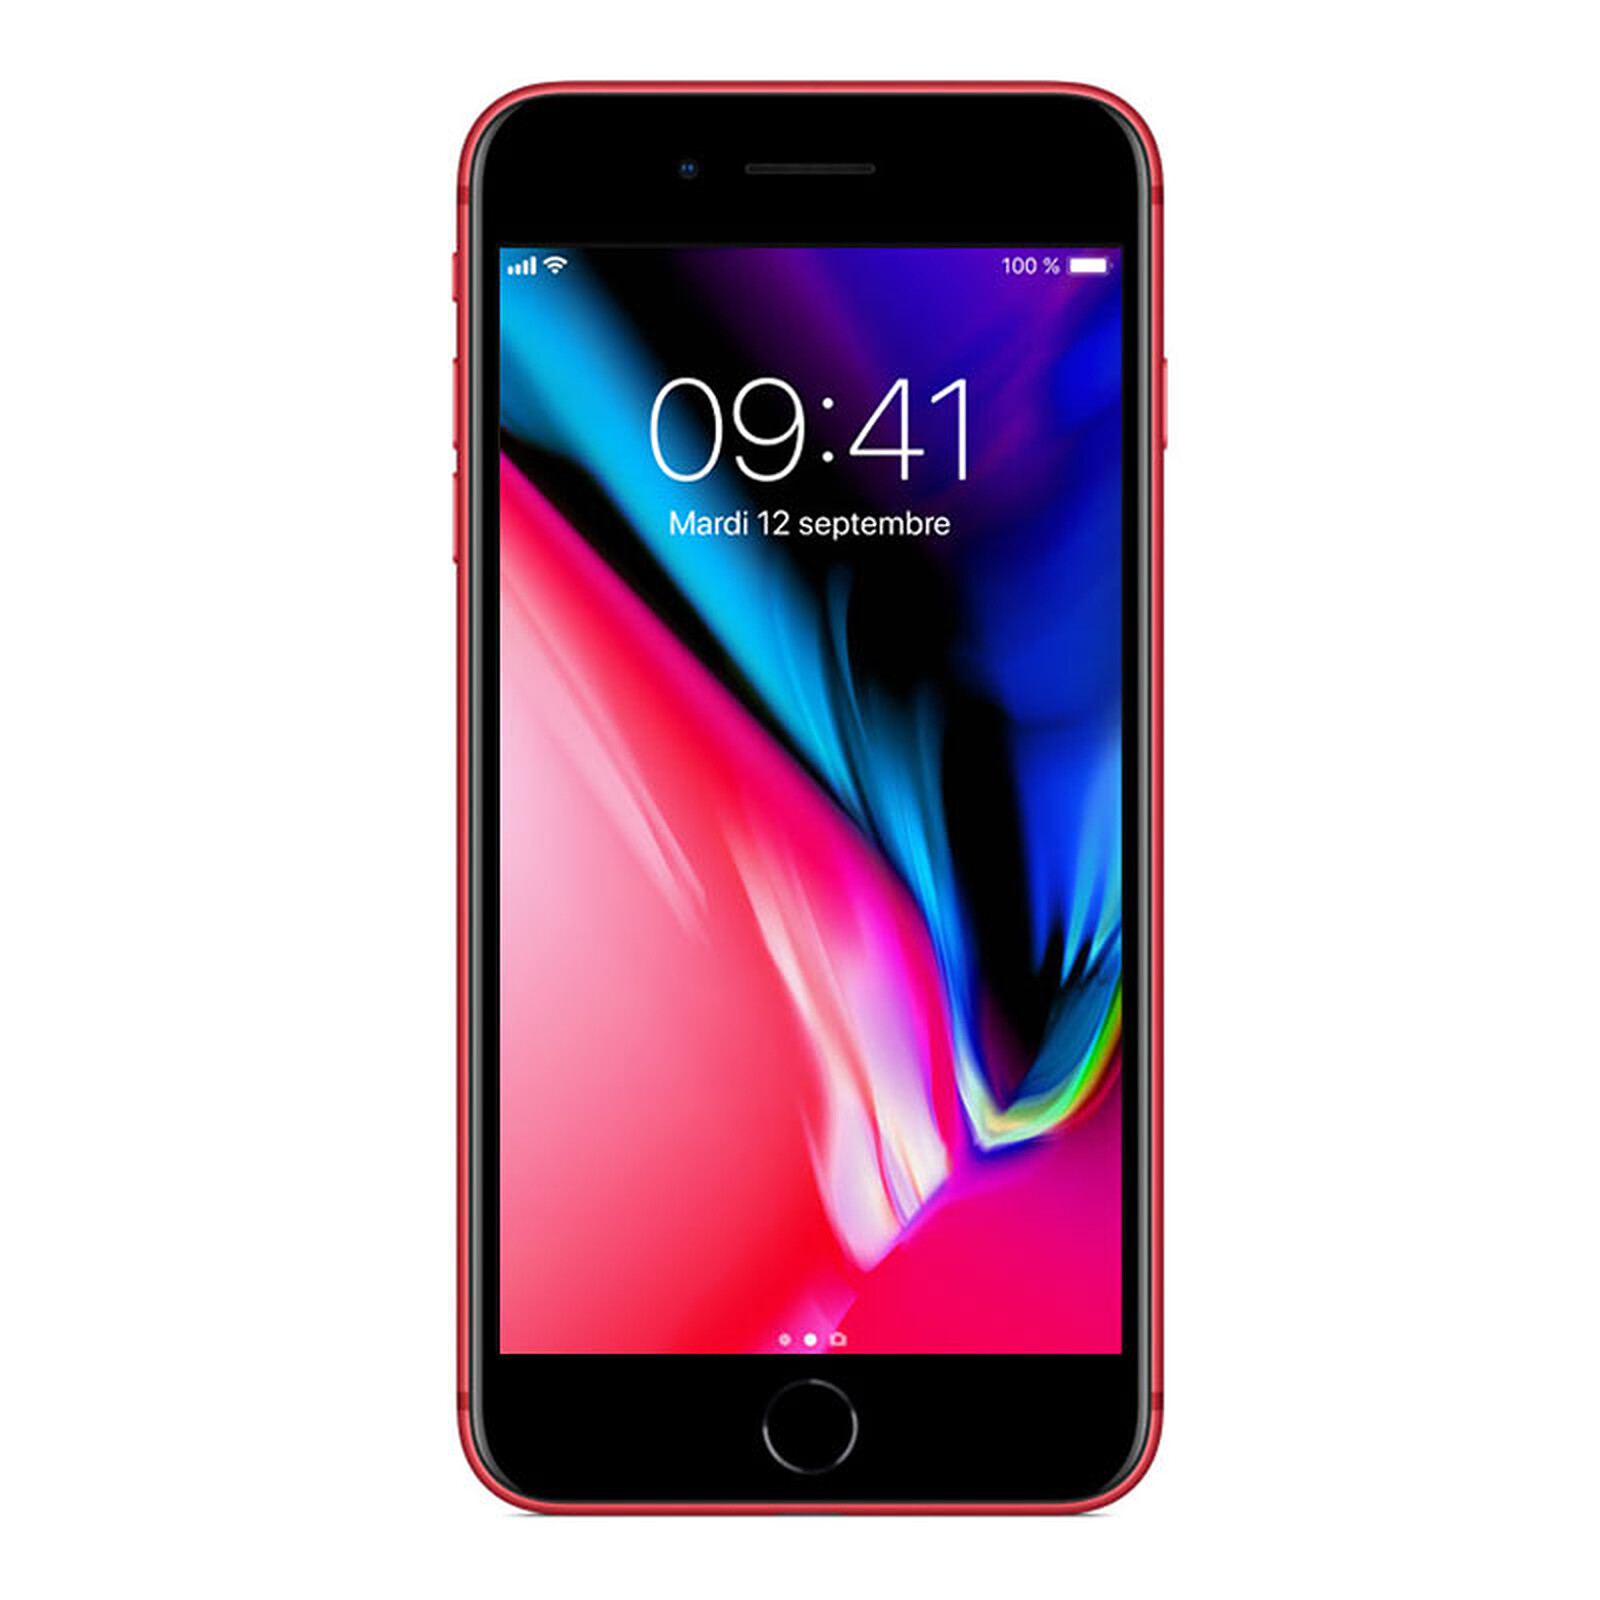 Apple iPhone 8 Plus 64GB (PRODUCT)RED - Mobile phone & smartphone